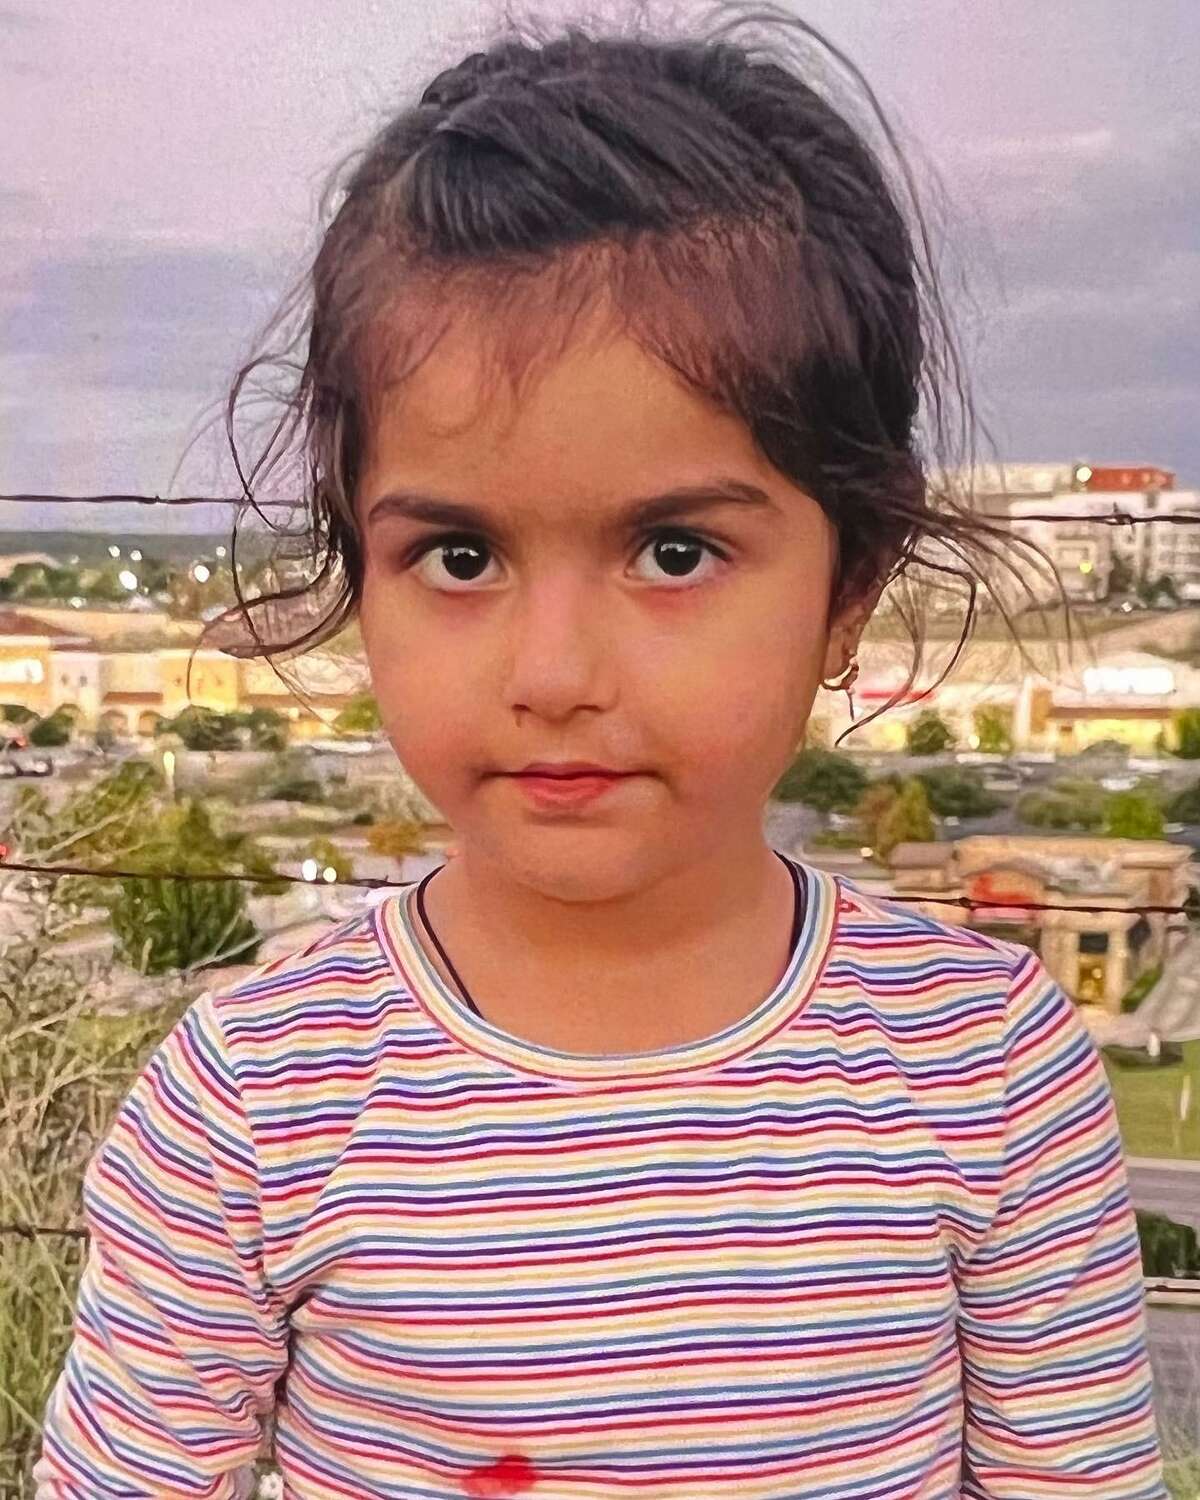 Missing 3-year-old Lina Sardar Khil was last seen Dec. 20, 2021, on a playground at the Villas del Cabo apartment complex at 9400 Fredericksburg Road.